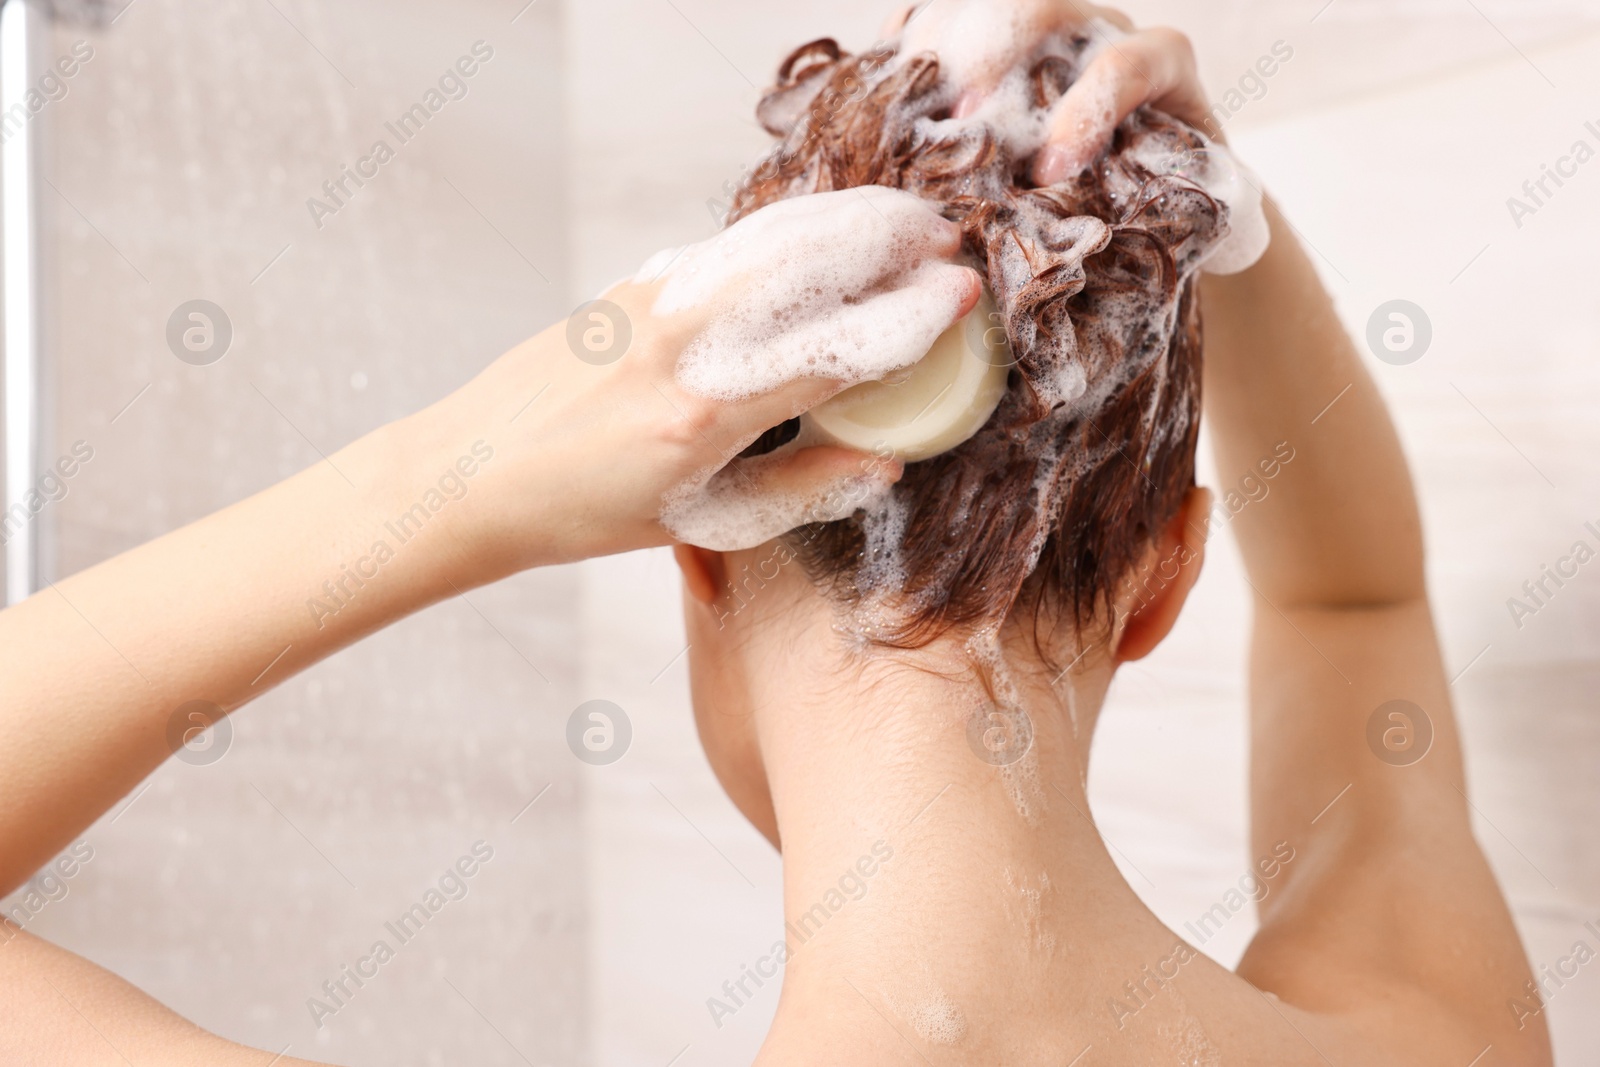 Photo of Young woman washing her hair with solid shampoo bar in shower, back view